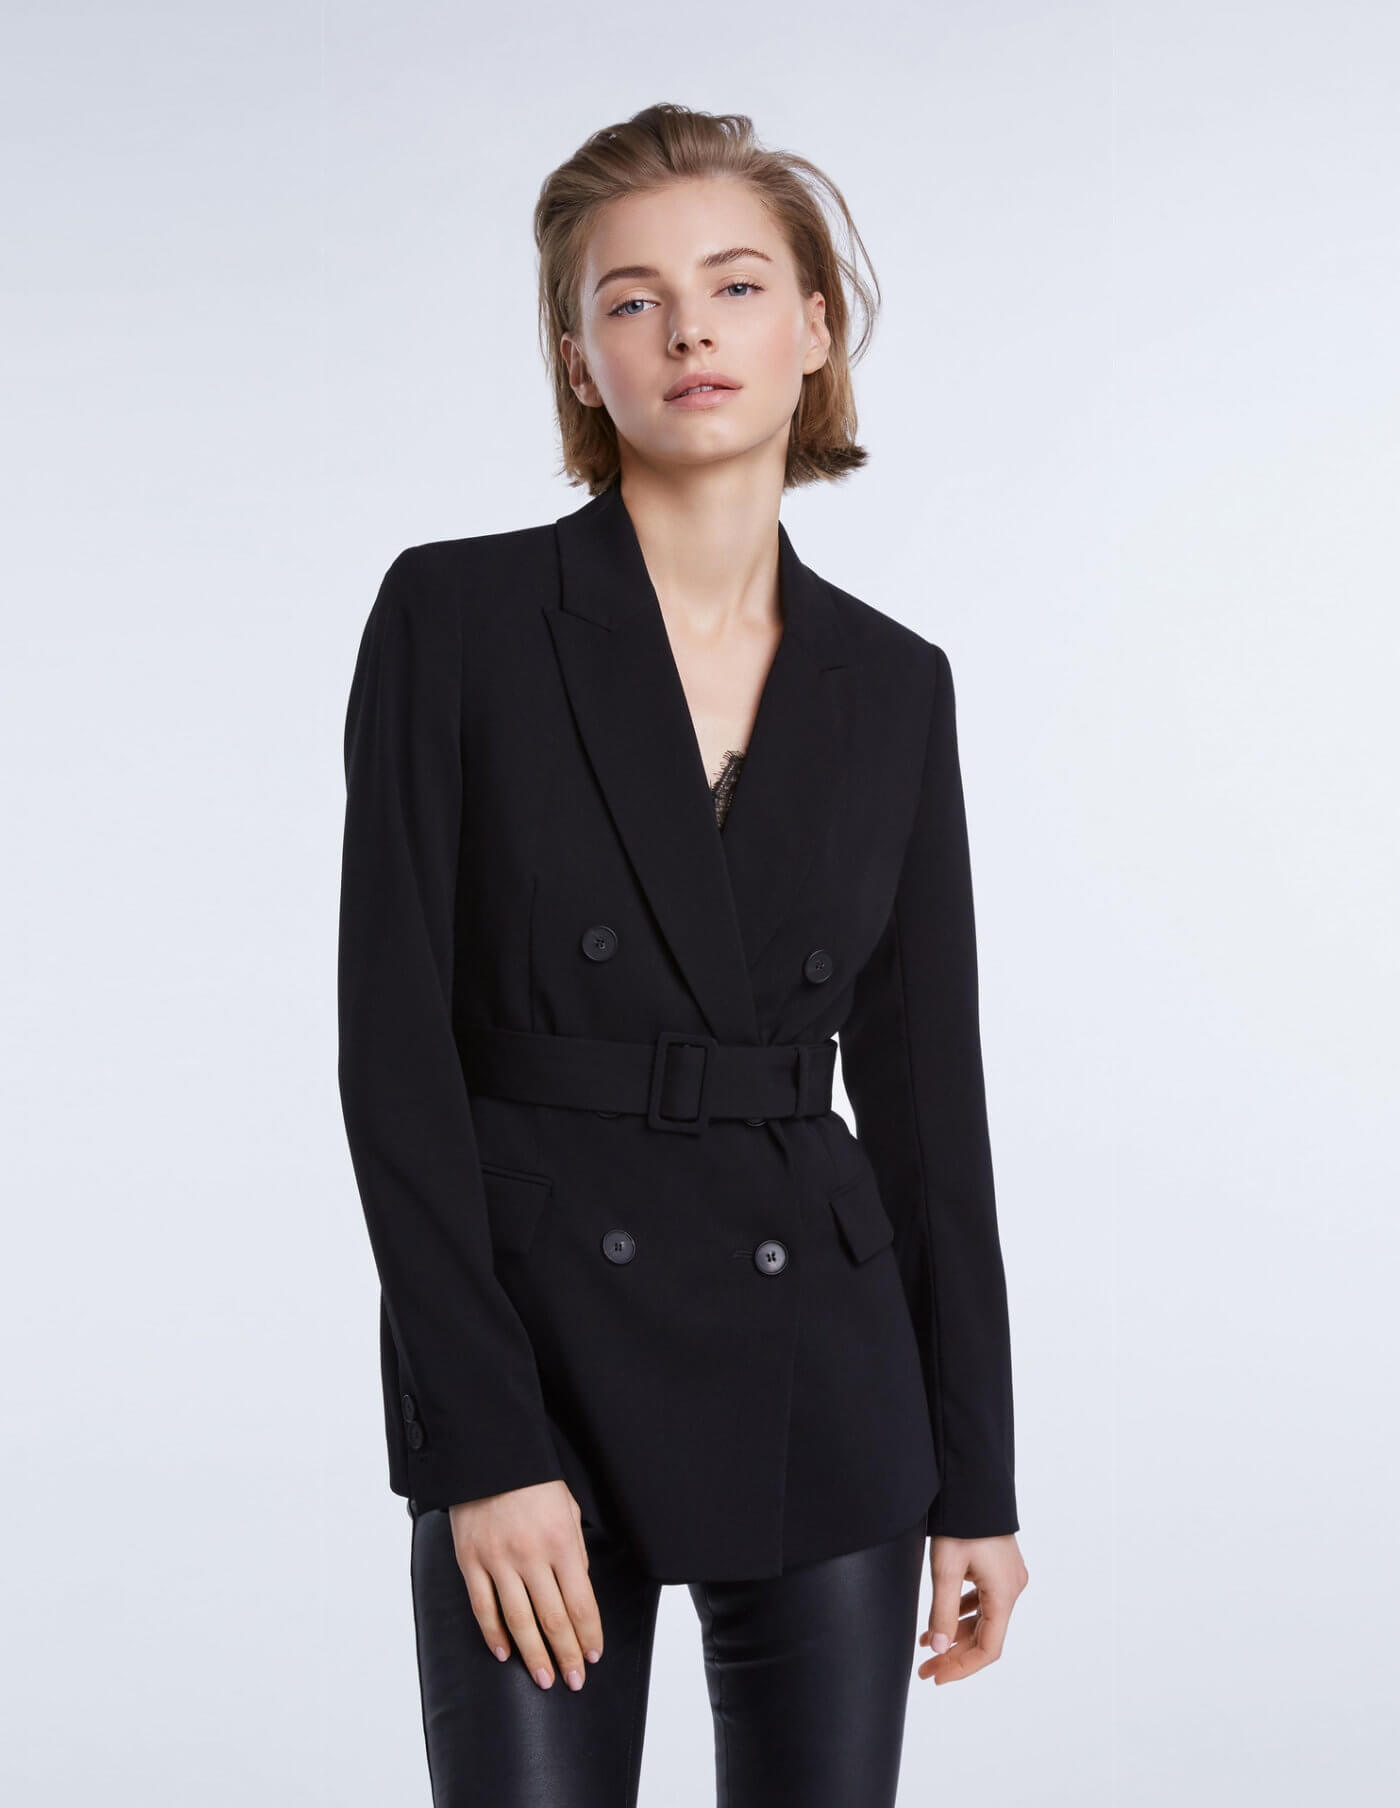 Set Double Breasted Blazer In Black at Storm Fashion